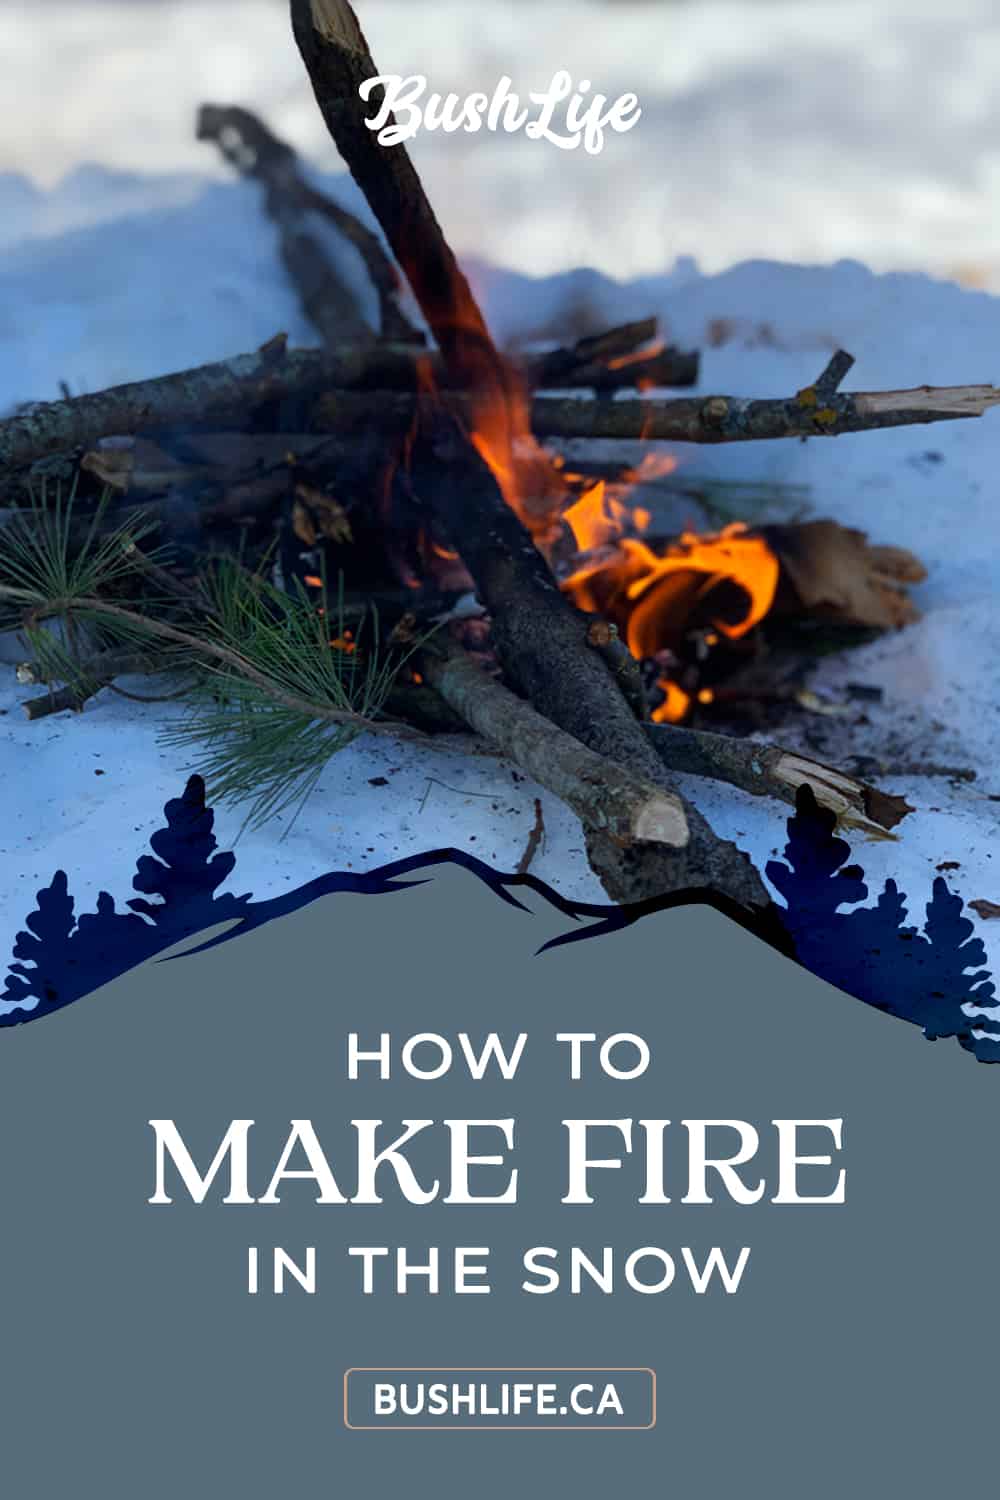 How To Make Fire in the Snow